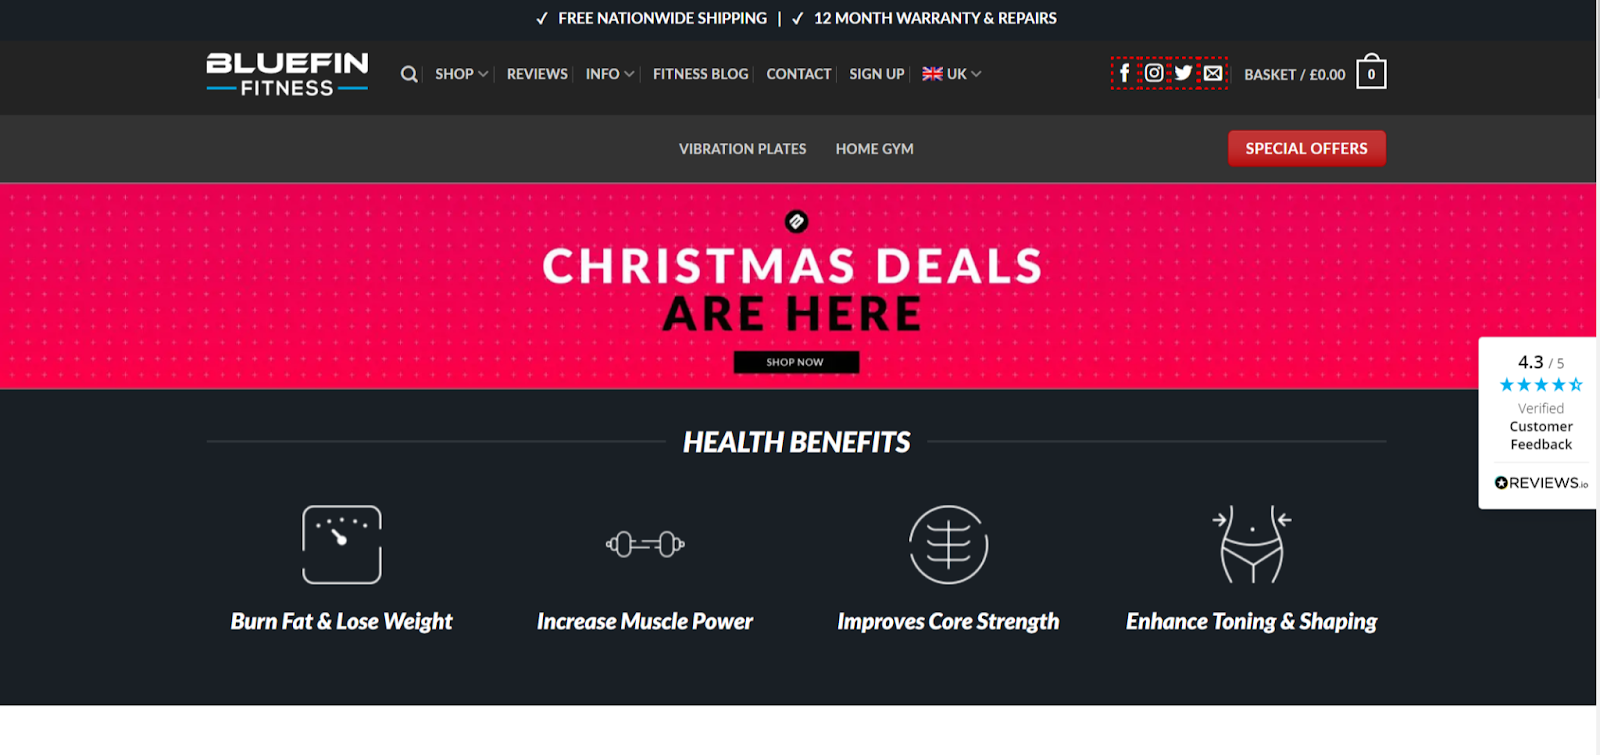 Bluefin Fitness website homepage